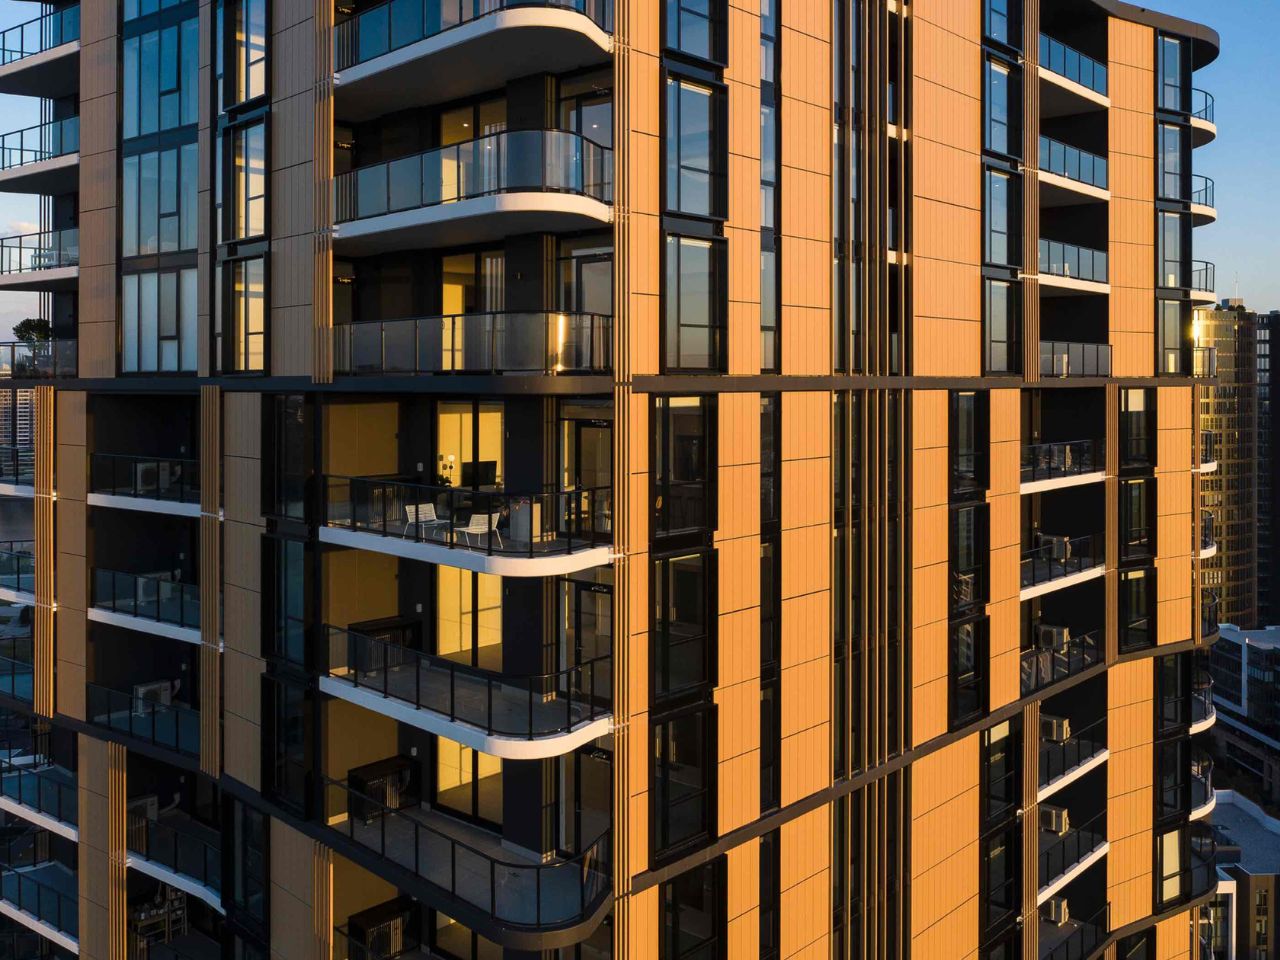 TONALITY non-combustible terracotta and ceramic façade on the Sanctuary Apartments in NSW.